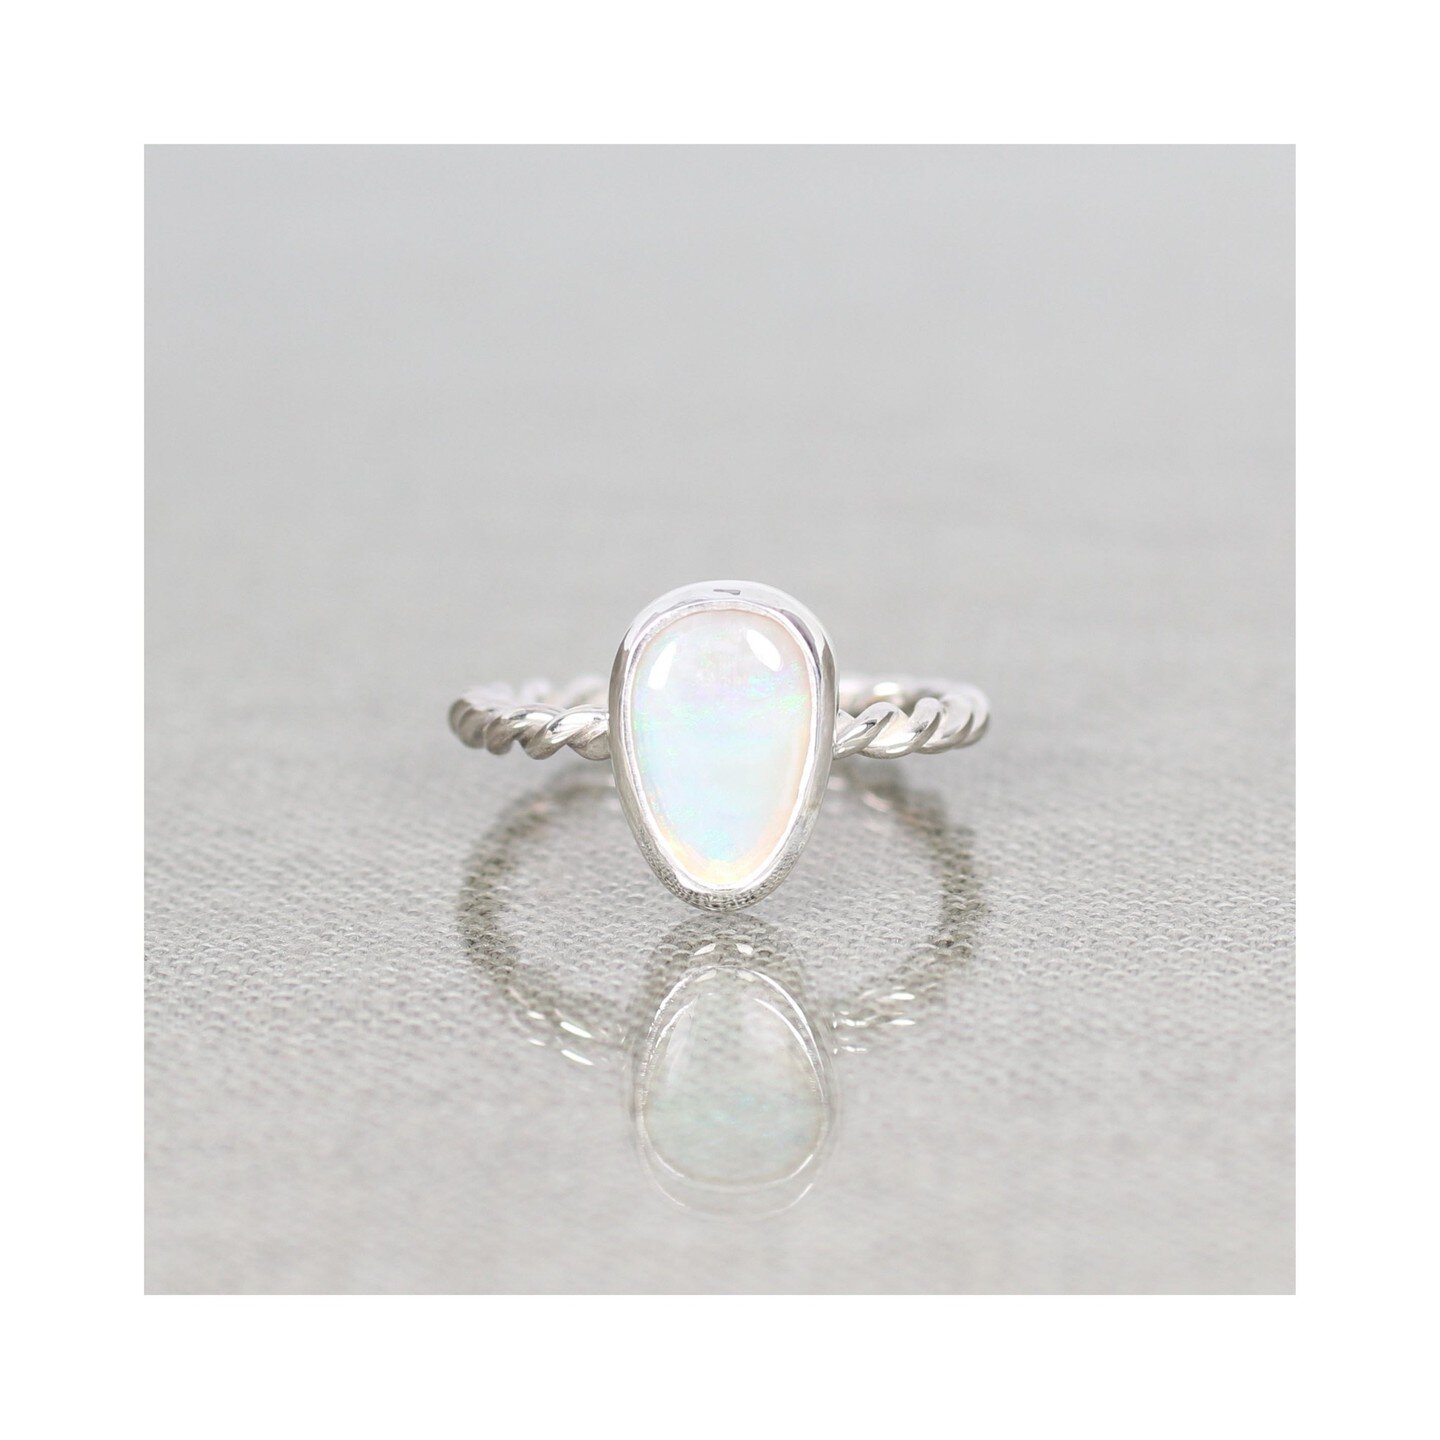 There's a tranquil beauty to this opal that reminds me of an iceberg ❄

#iceblue # crystalopal #arborjewellery #opaljewellery